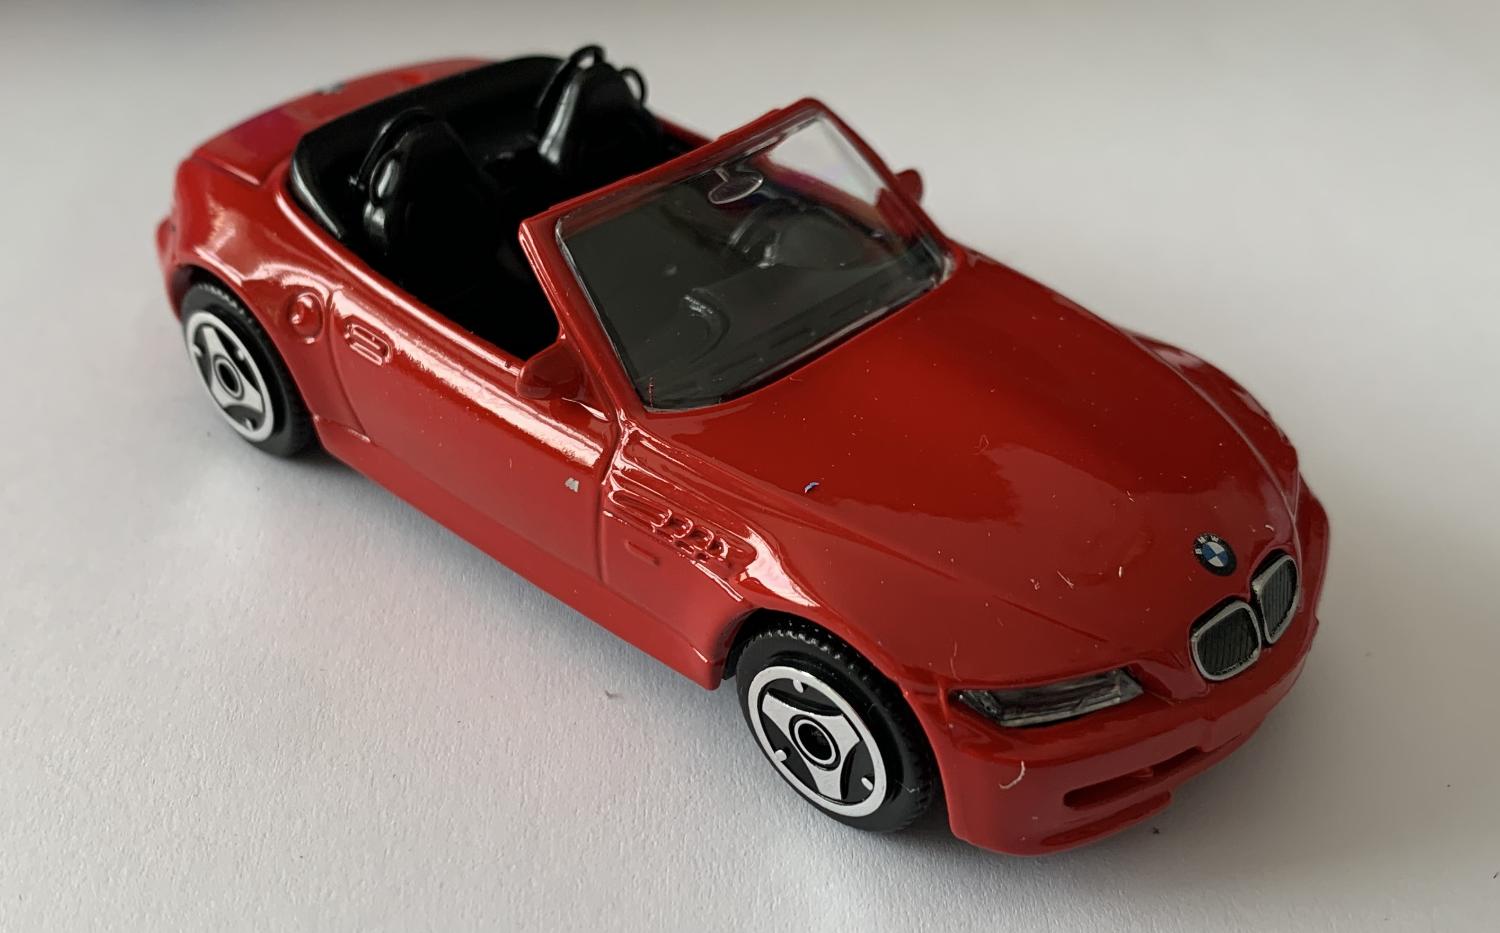 BMW M Roadster in red 1:43 scale model from Bburago, streetfire